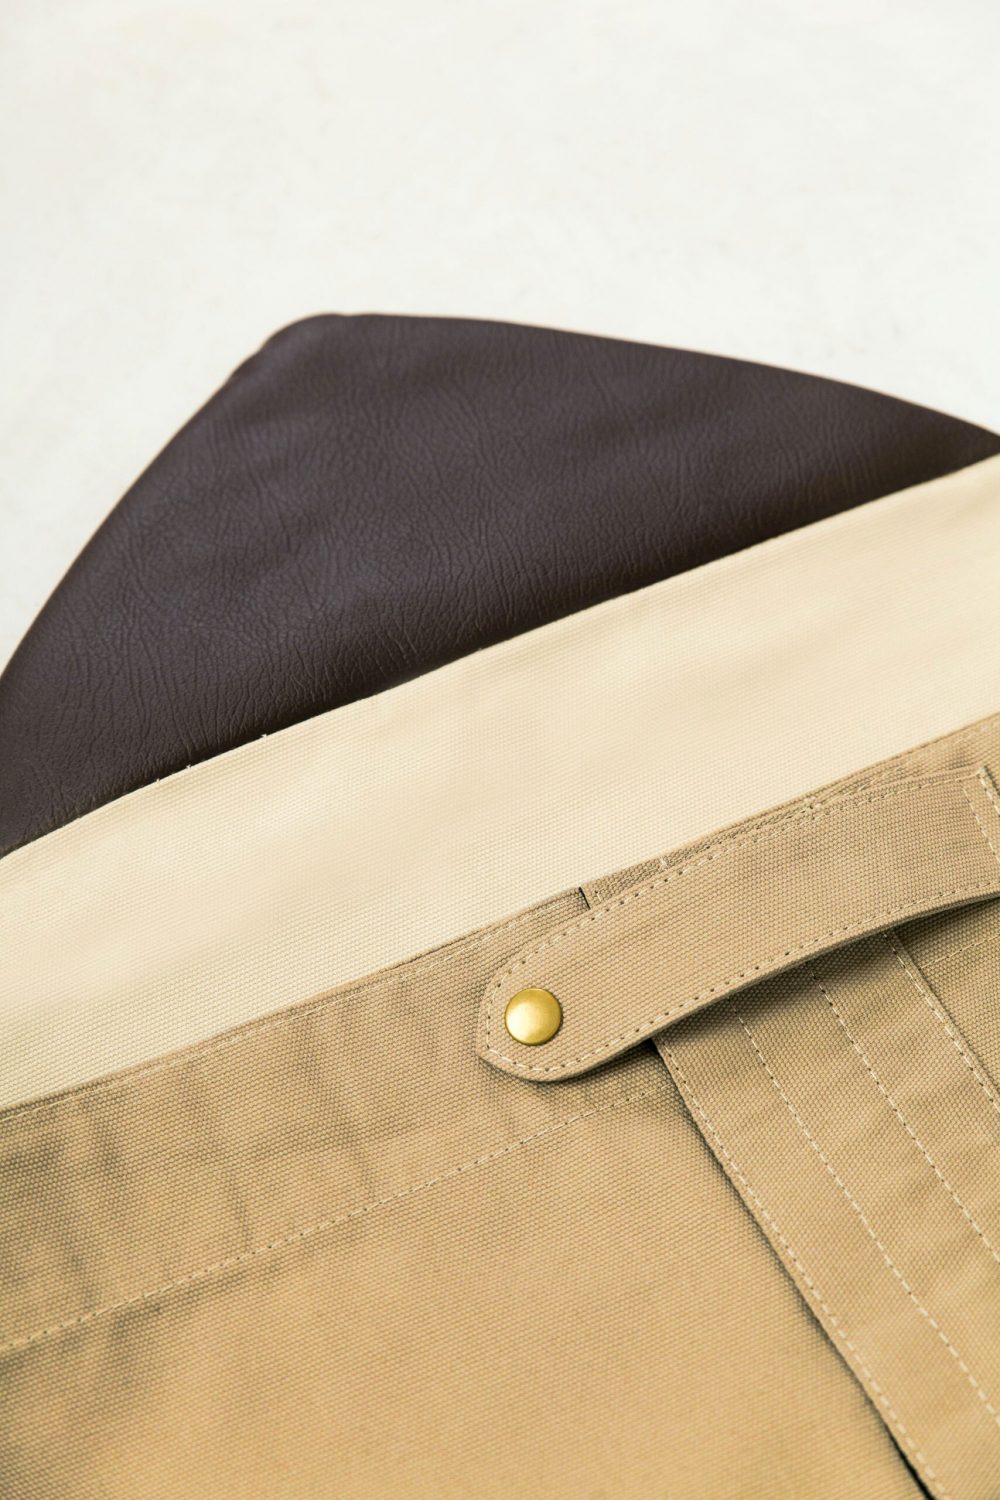 blank-miles-boardsock-light brown and beige-detail-button-scaled